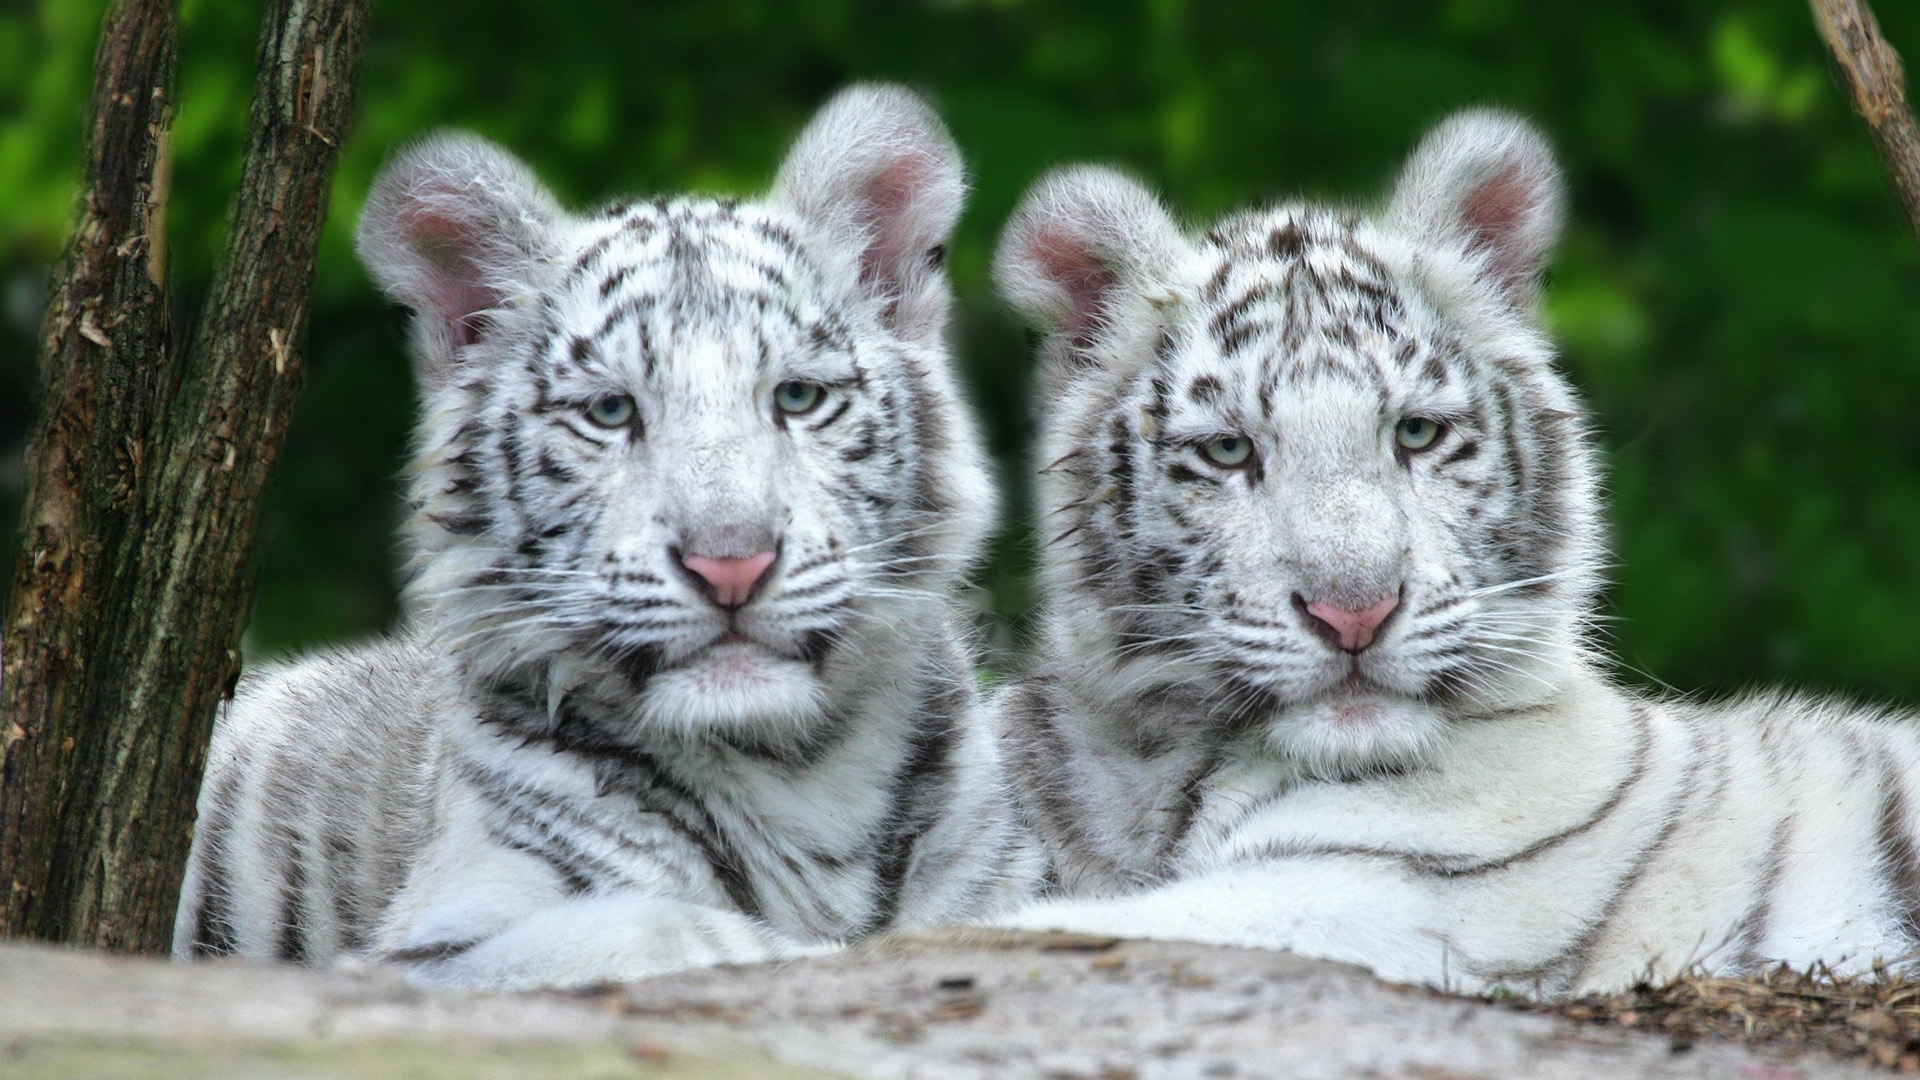 animals tigers white tiger cubs 1920x1080 wallpapers High